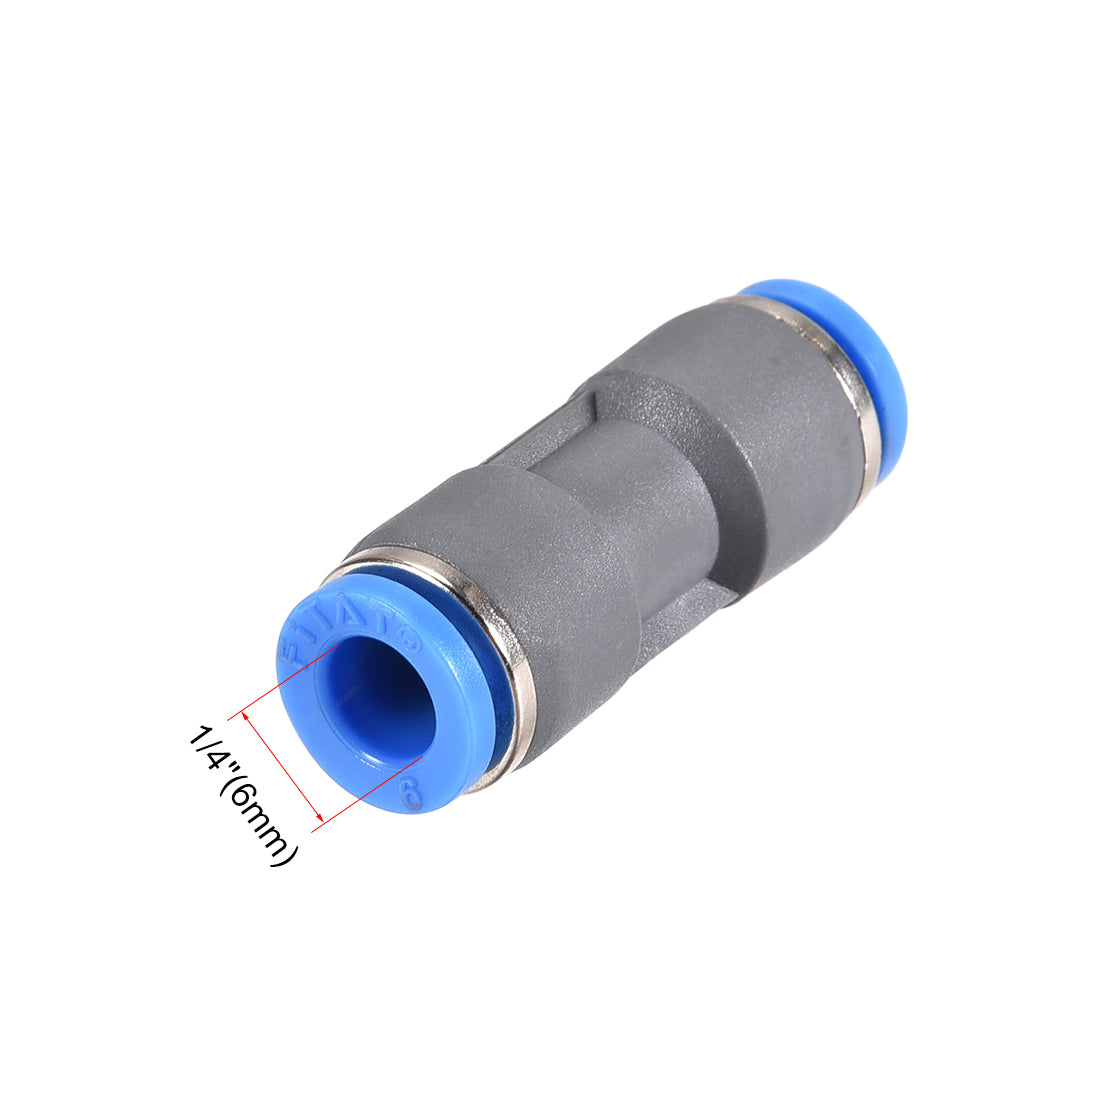 uxcell Uxcell Straight Push Connectors 6mm Quick Release Pneumatic Connector Plastic Union Pipe Tube Fitting Grey 2Pcs